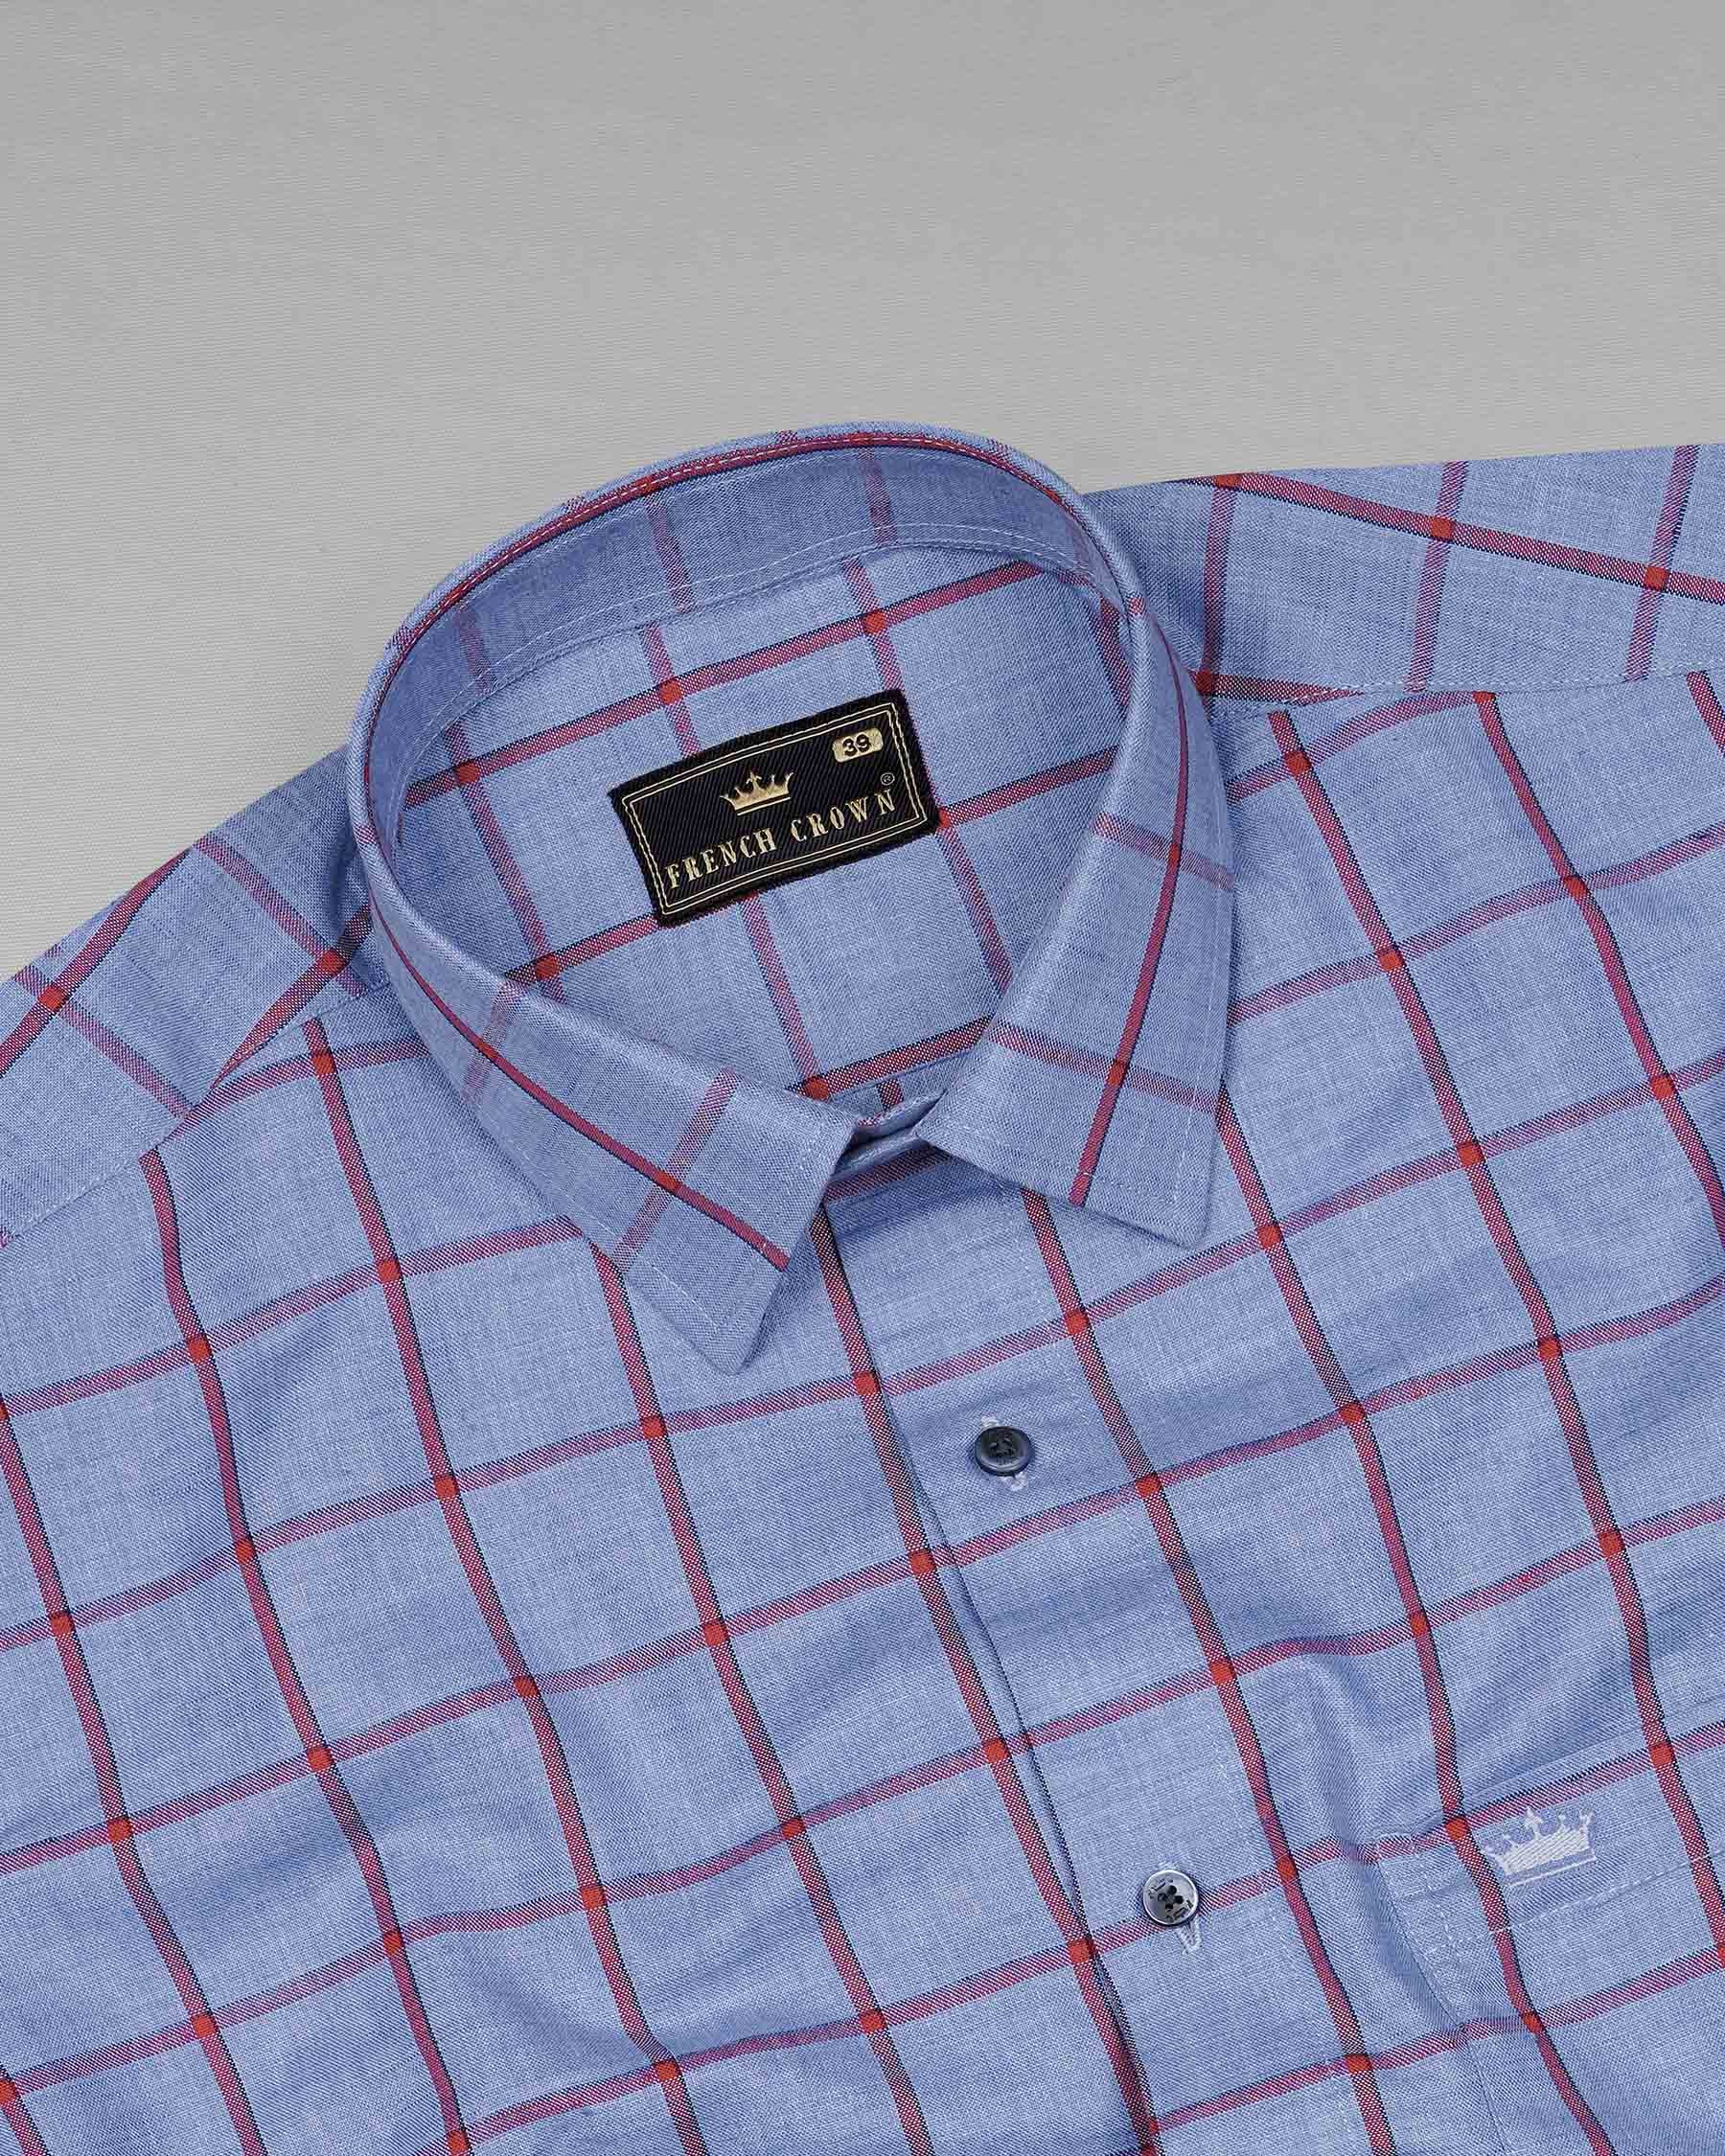 Shipcove Blue and Chestnut Red Windowpane Royal Oxford Shirt